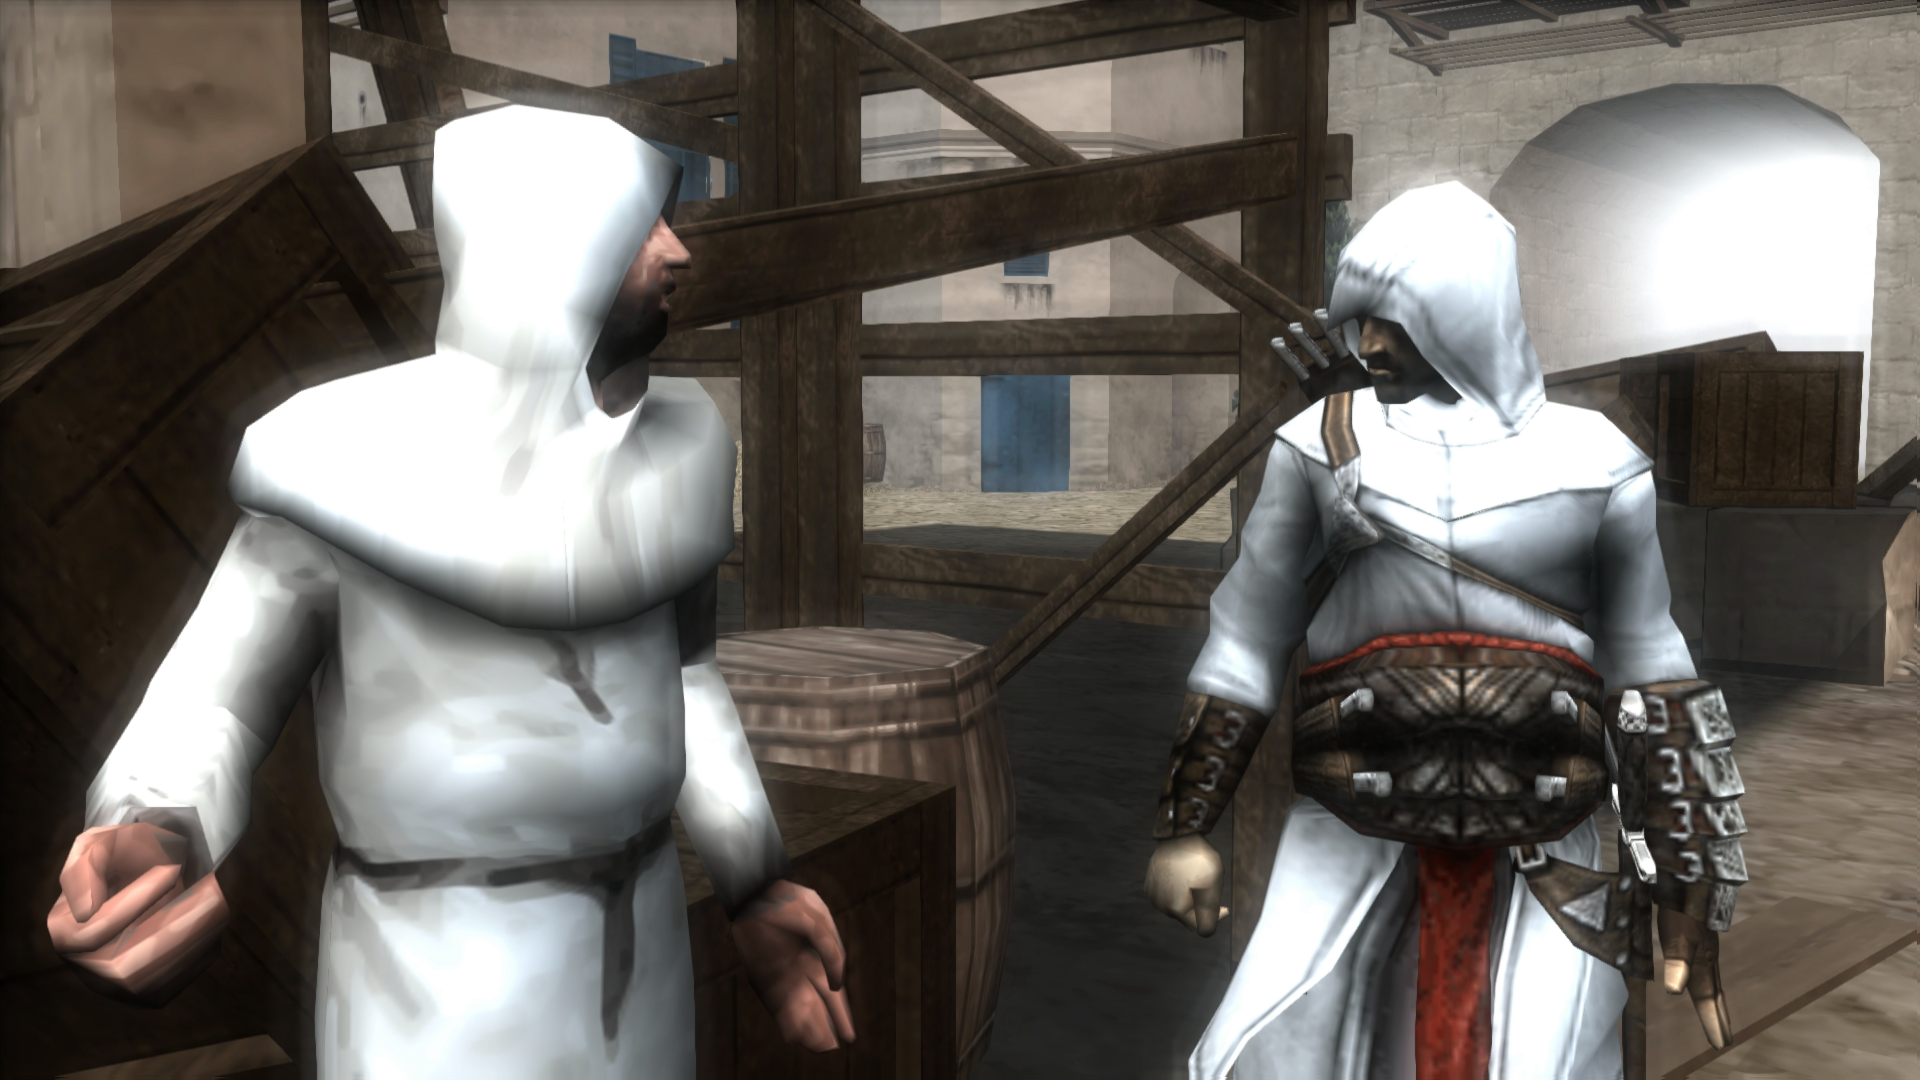 Assassins Creed Confessions assassins creed 2 main themes  Assassins creed  funny, Assassin's creed, Assassins creed